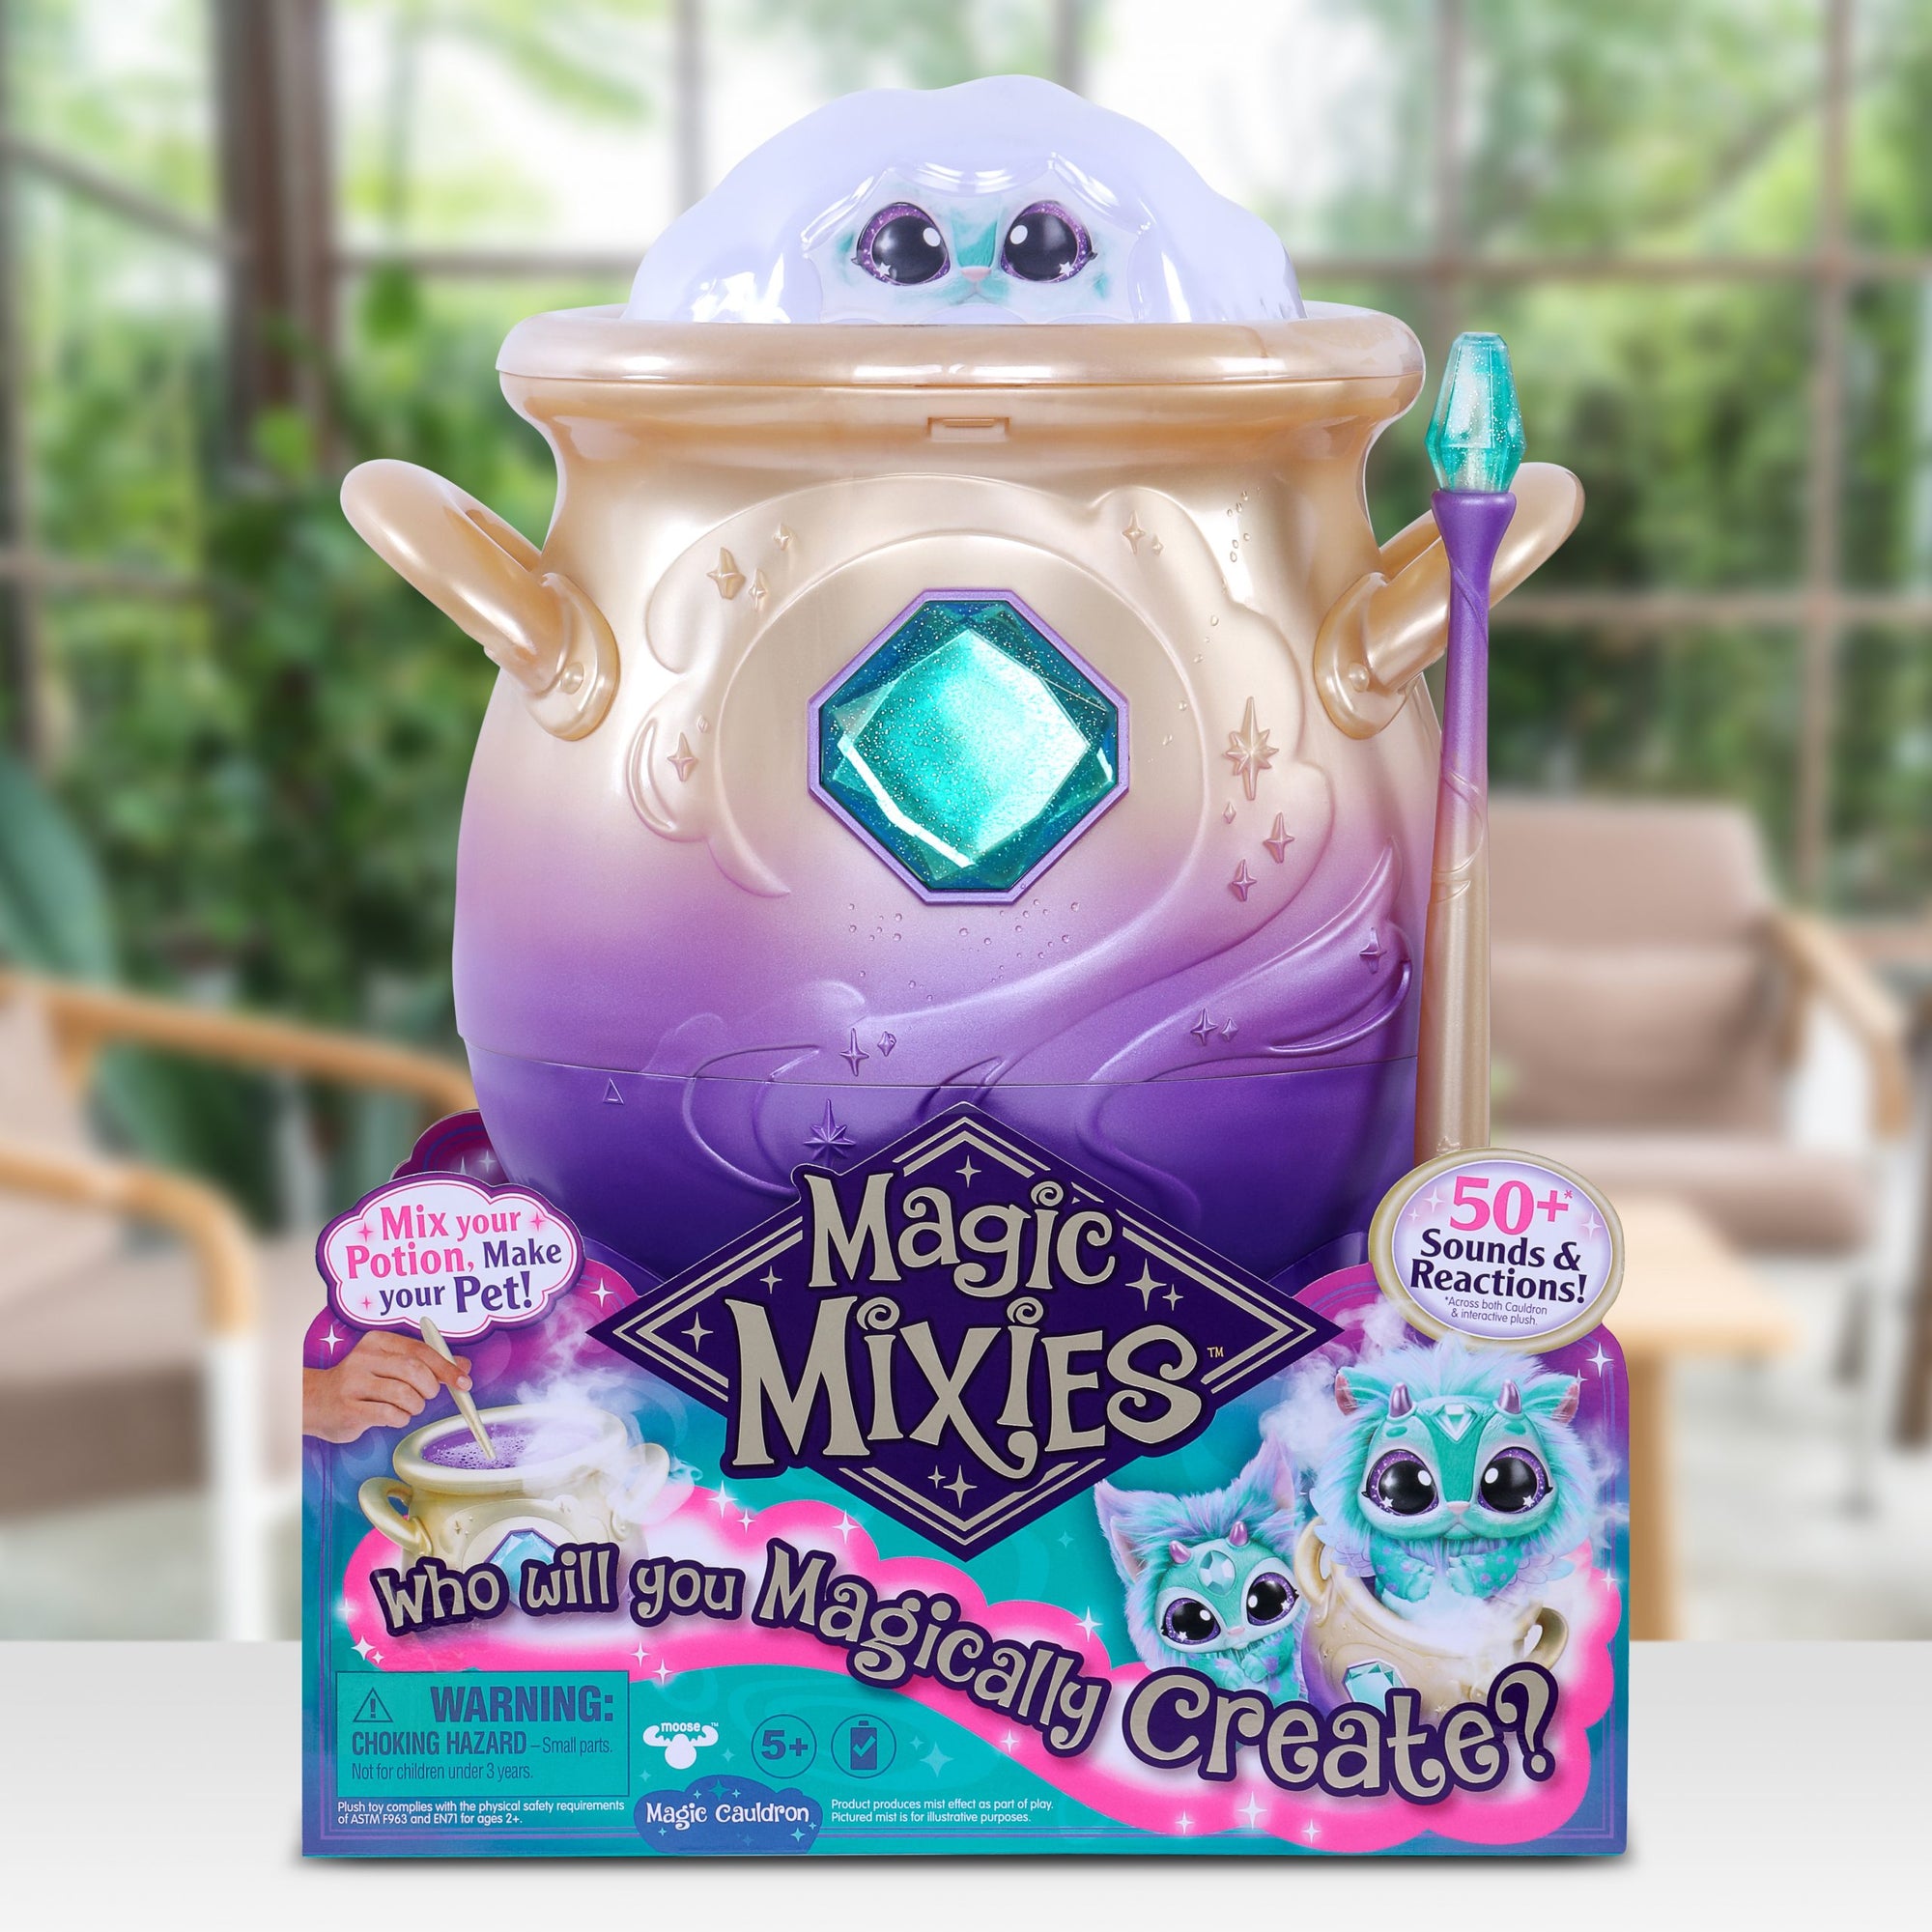 Magic Mixies Magic Cauldron Blue requires charge before first use